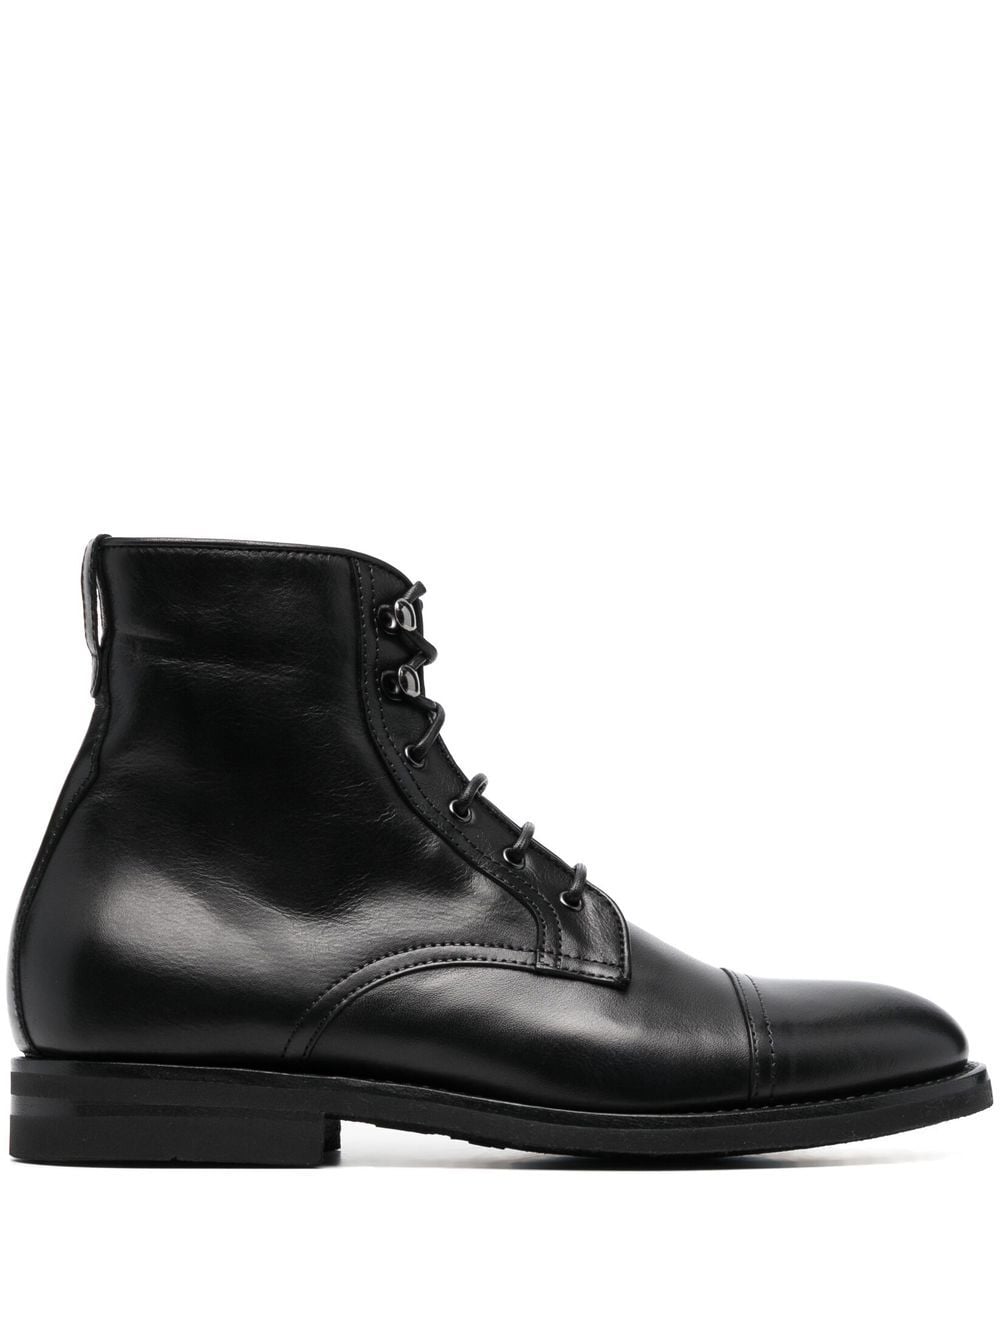 Scarosso Paola Lace-up Ankle Boots In Black Calf | ModeSens